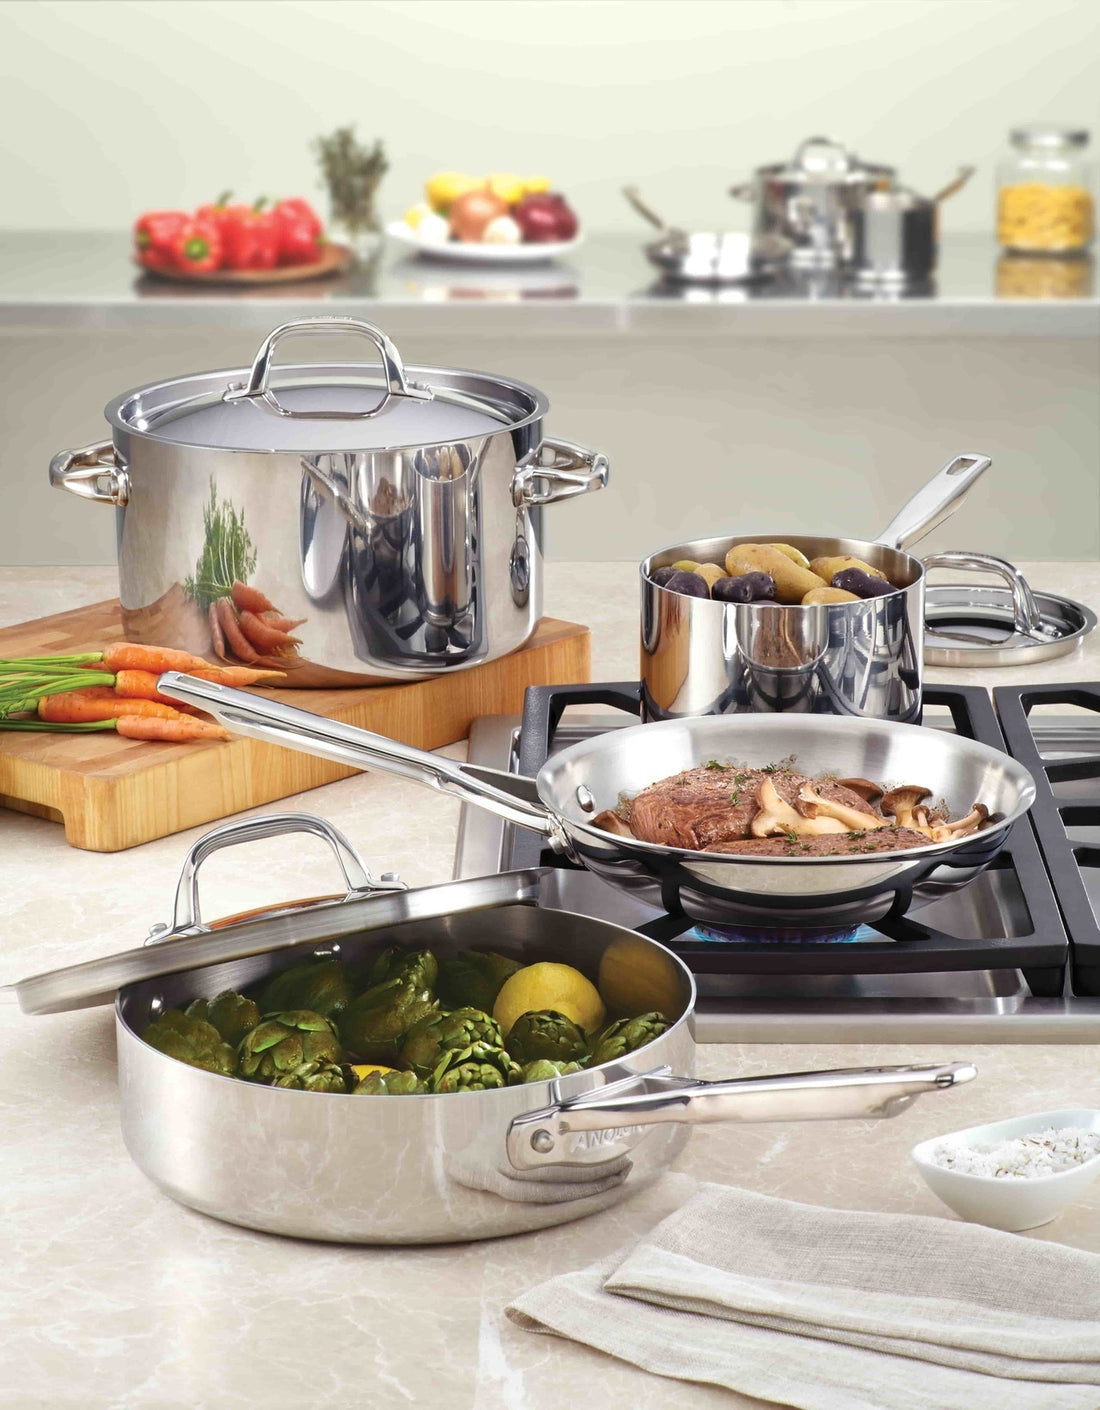 How to choose the best cookware set